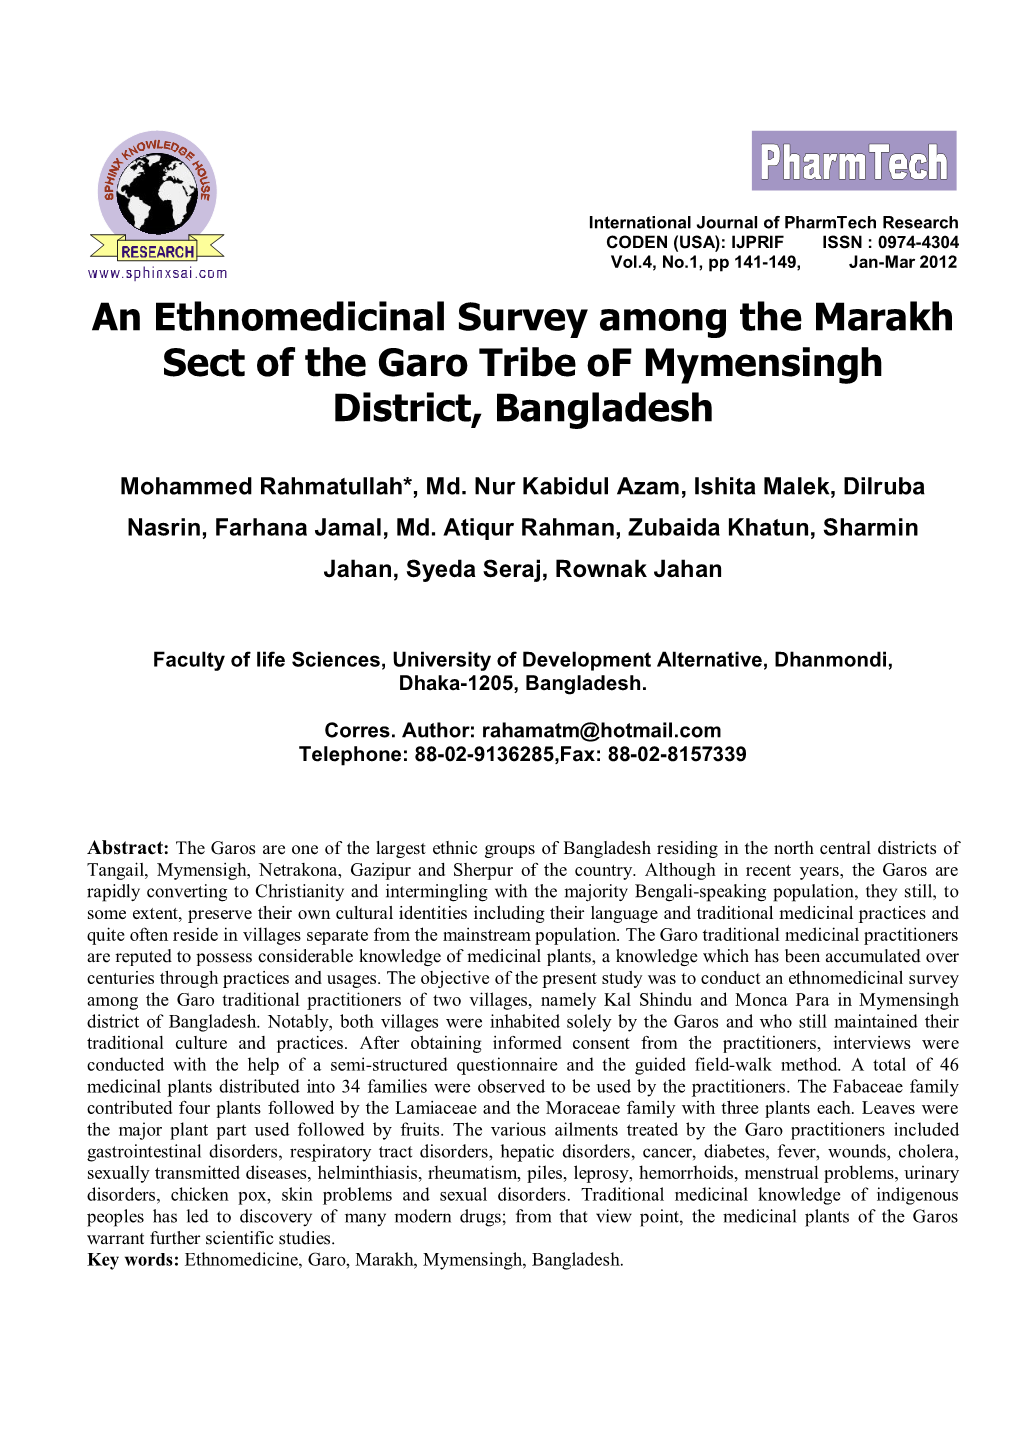 An Ethnomedicinal Survey Among the Marakh Sect of the Garo Tribe of Mymensingh District, Bangladesh